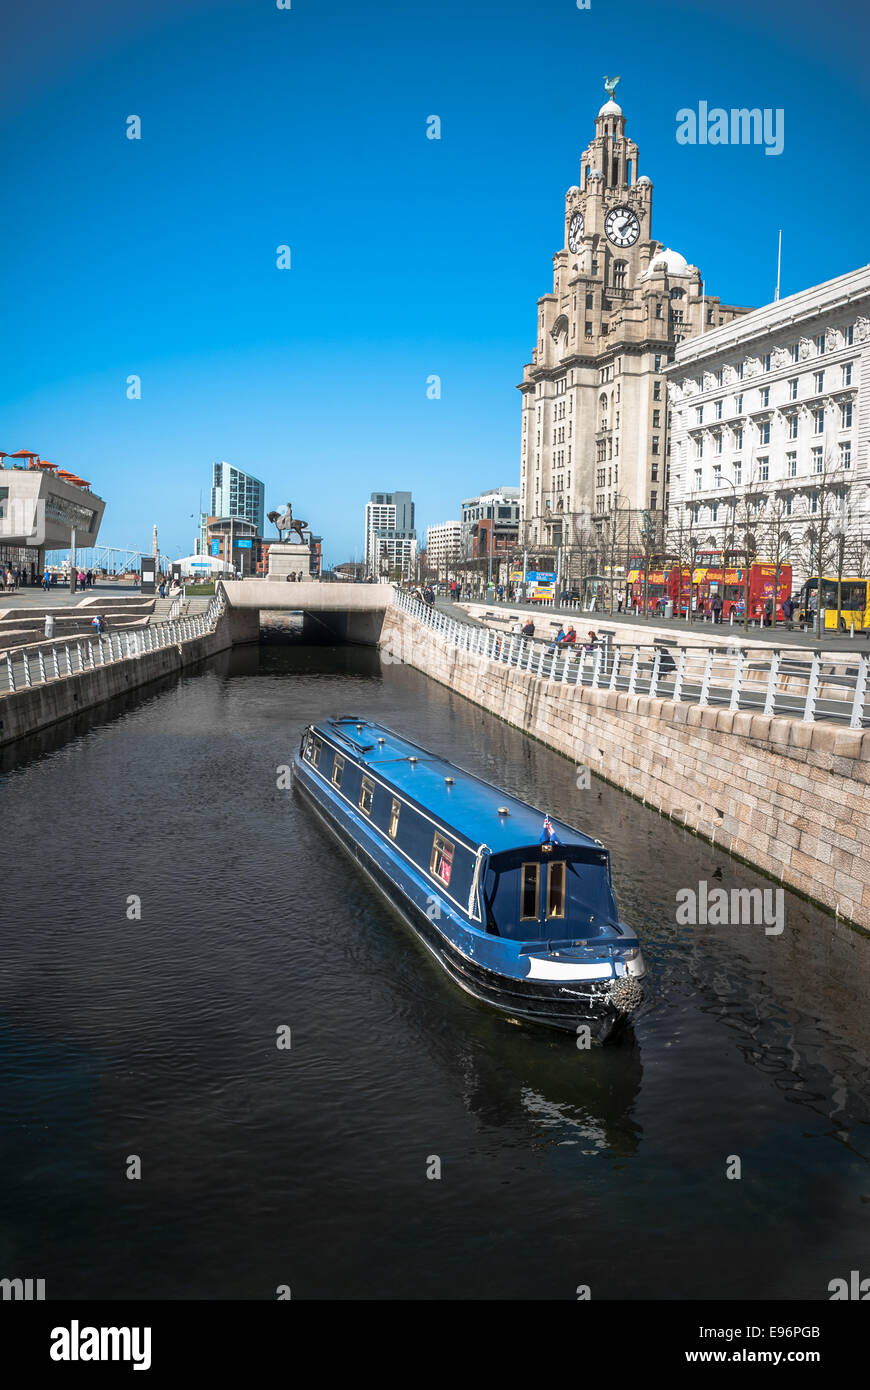 A narrowboat cruising along the Liverpool central canal link at Pier Head with the Liver Building and ferry terminal in the backg Stock Photo